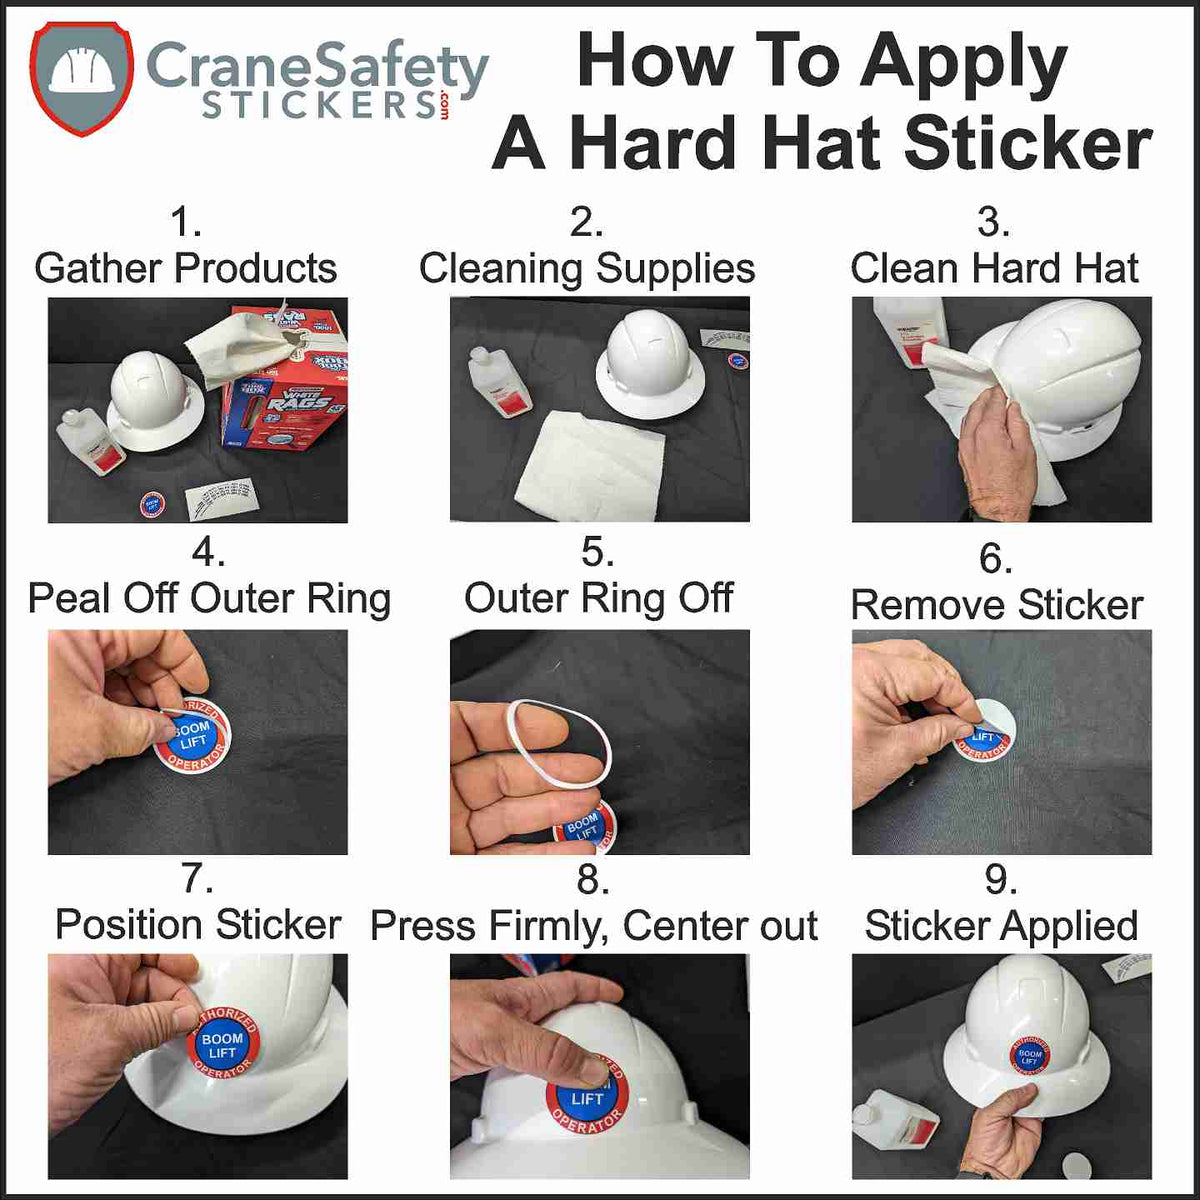 Directions on how to apply our certified crane operator sticker to a hard hat.